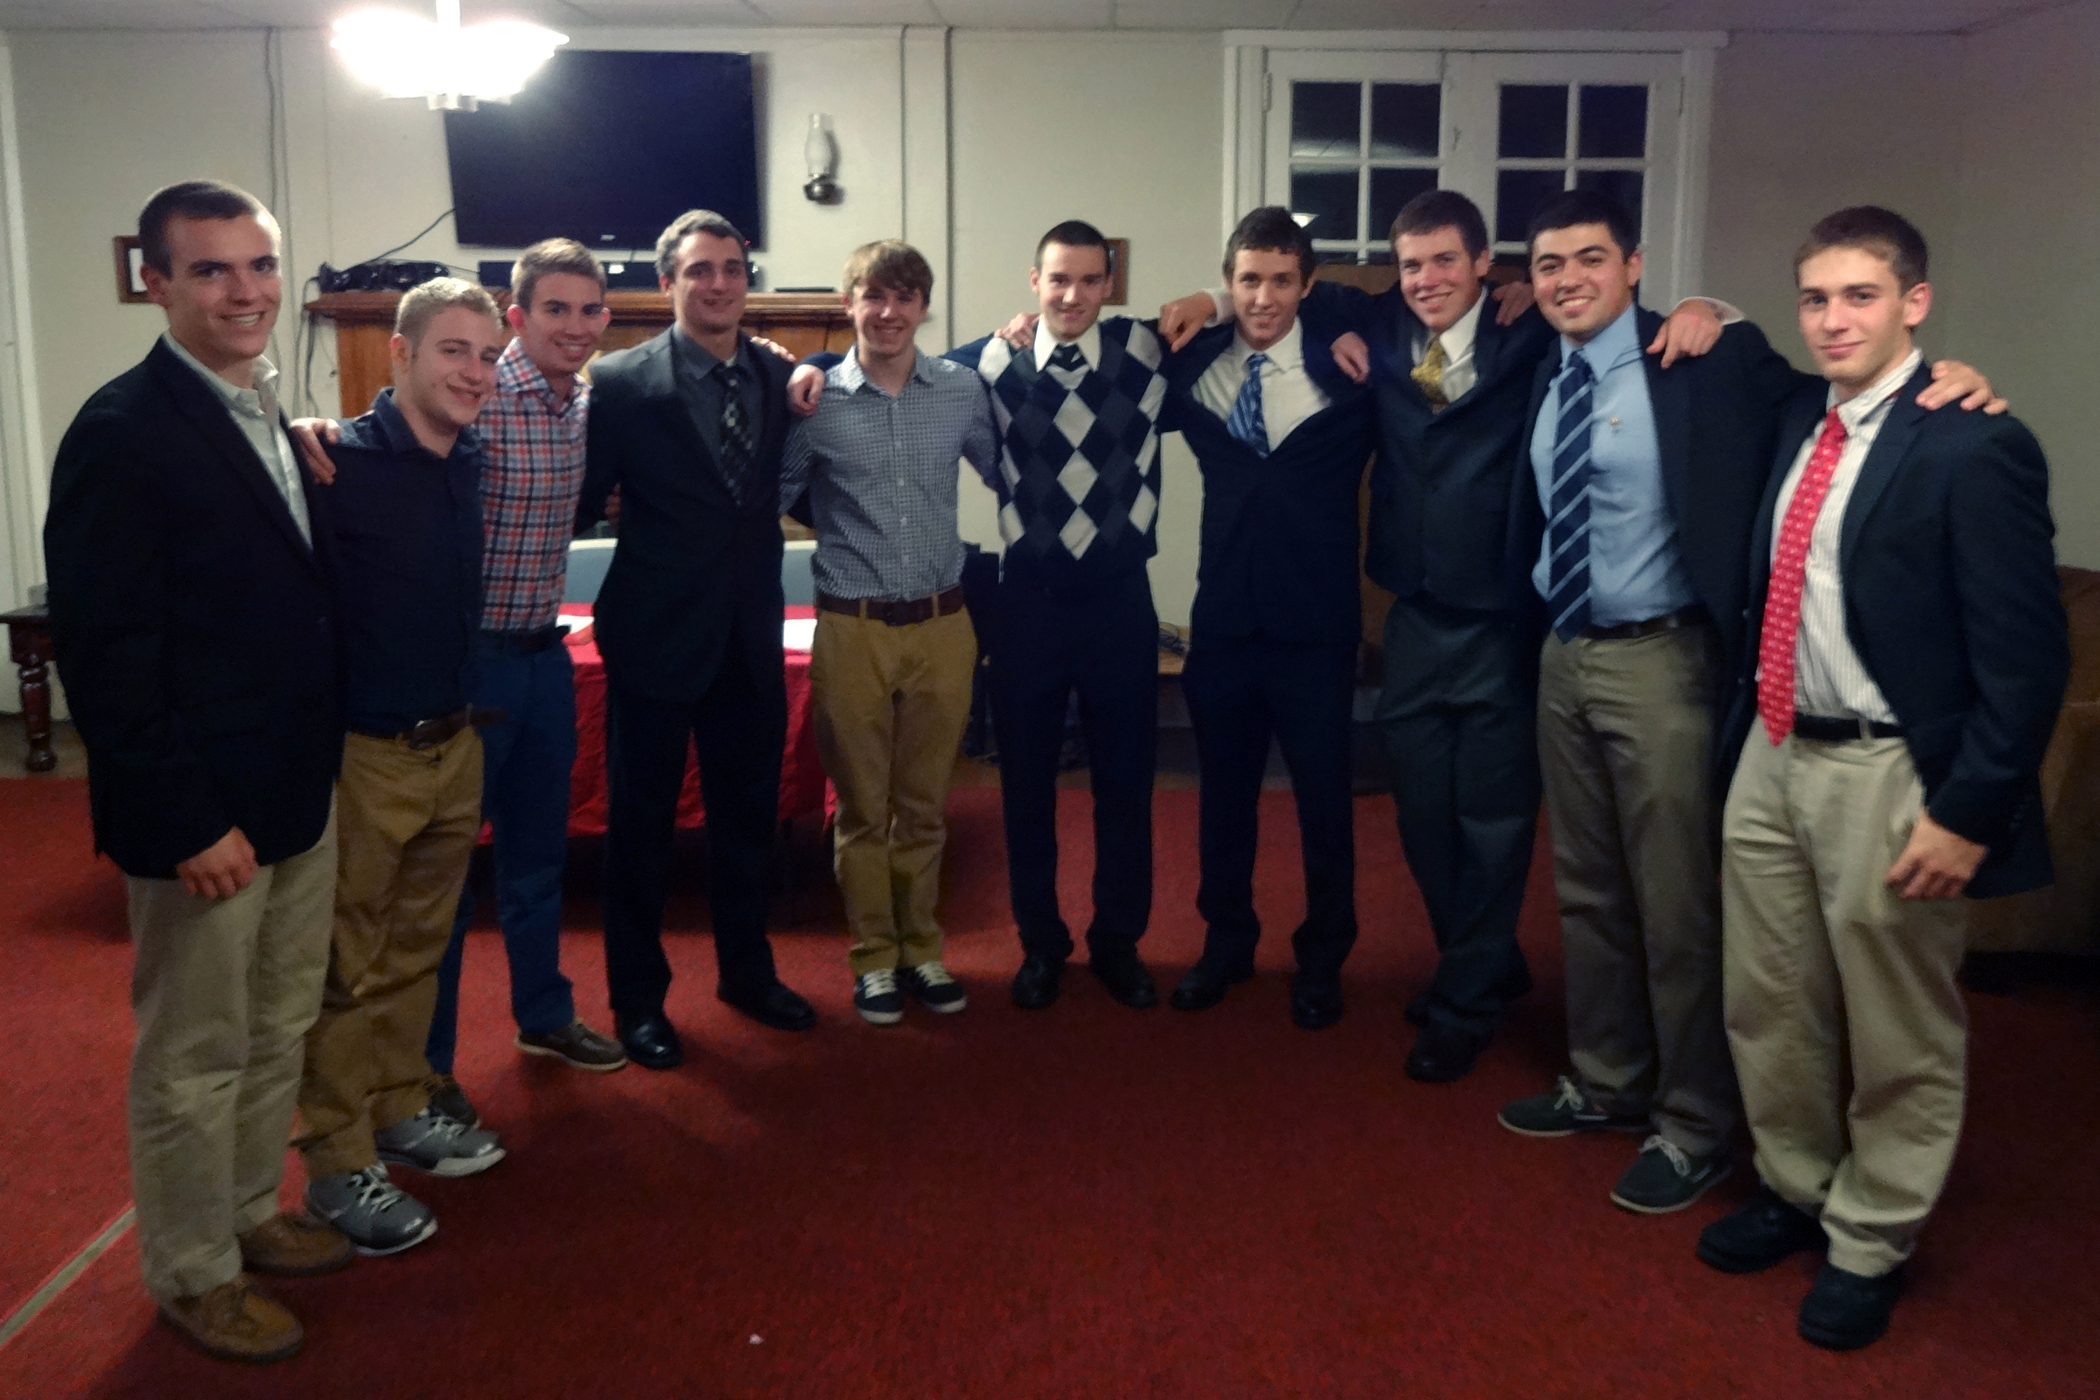 Chapter Pledges in 10 New Members — Theta Chi of Penn State